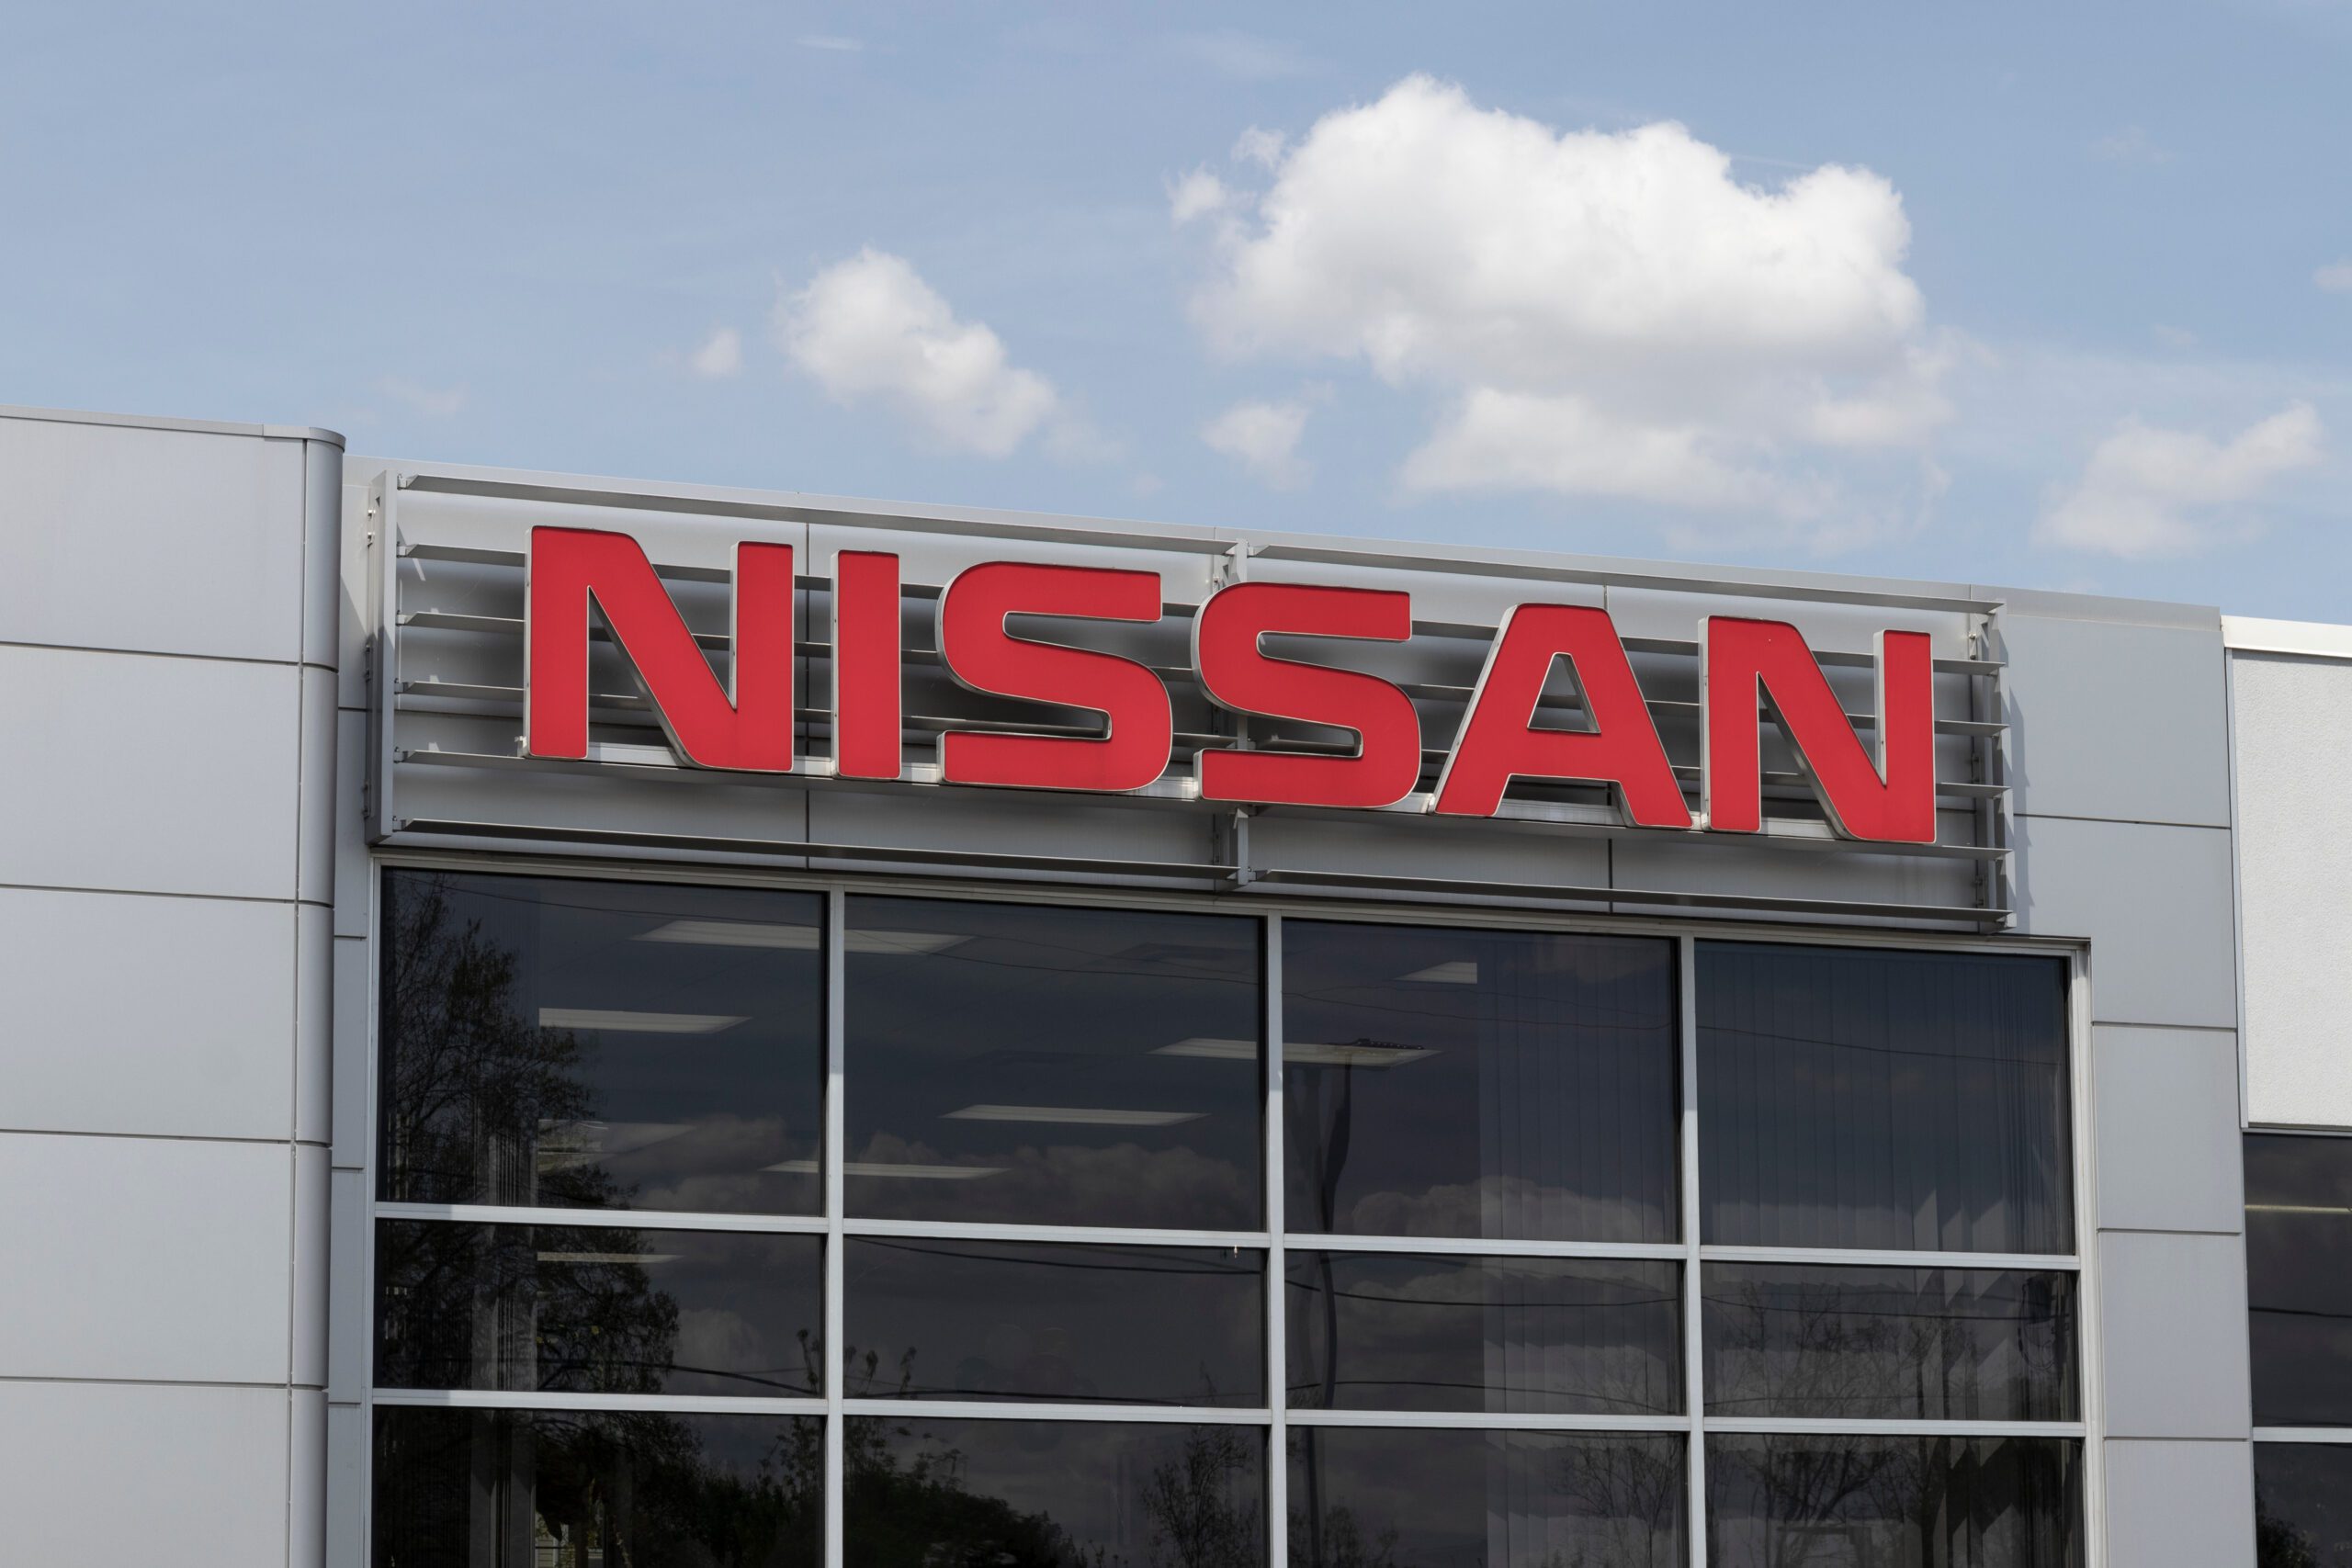 A lawsuit claims Nissan is liable for an alleged defect in the transmission of some Nissan vehicles.